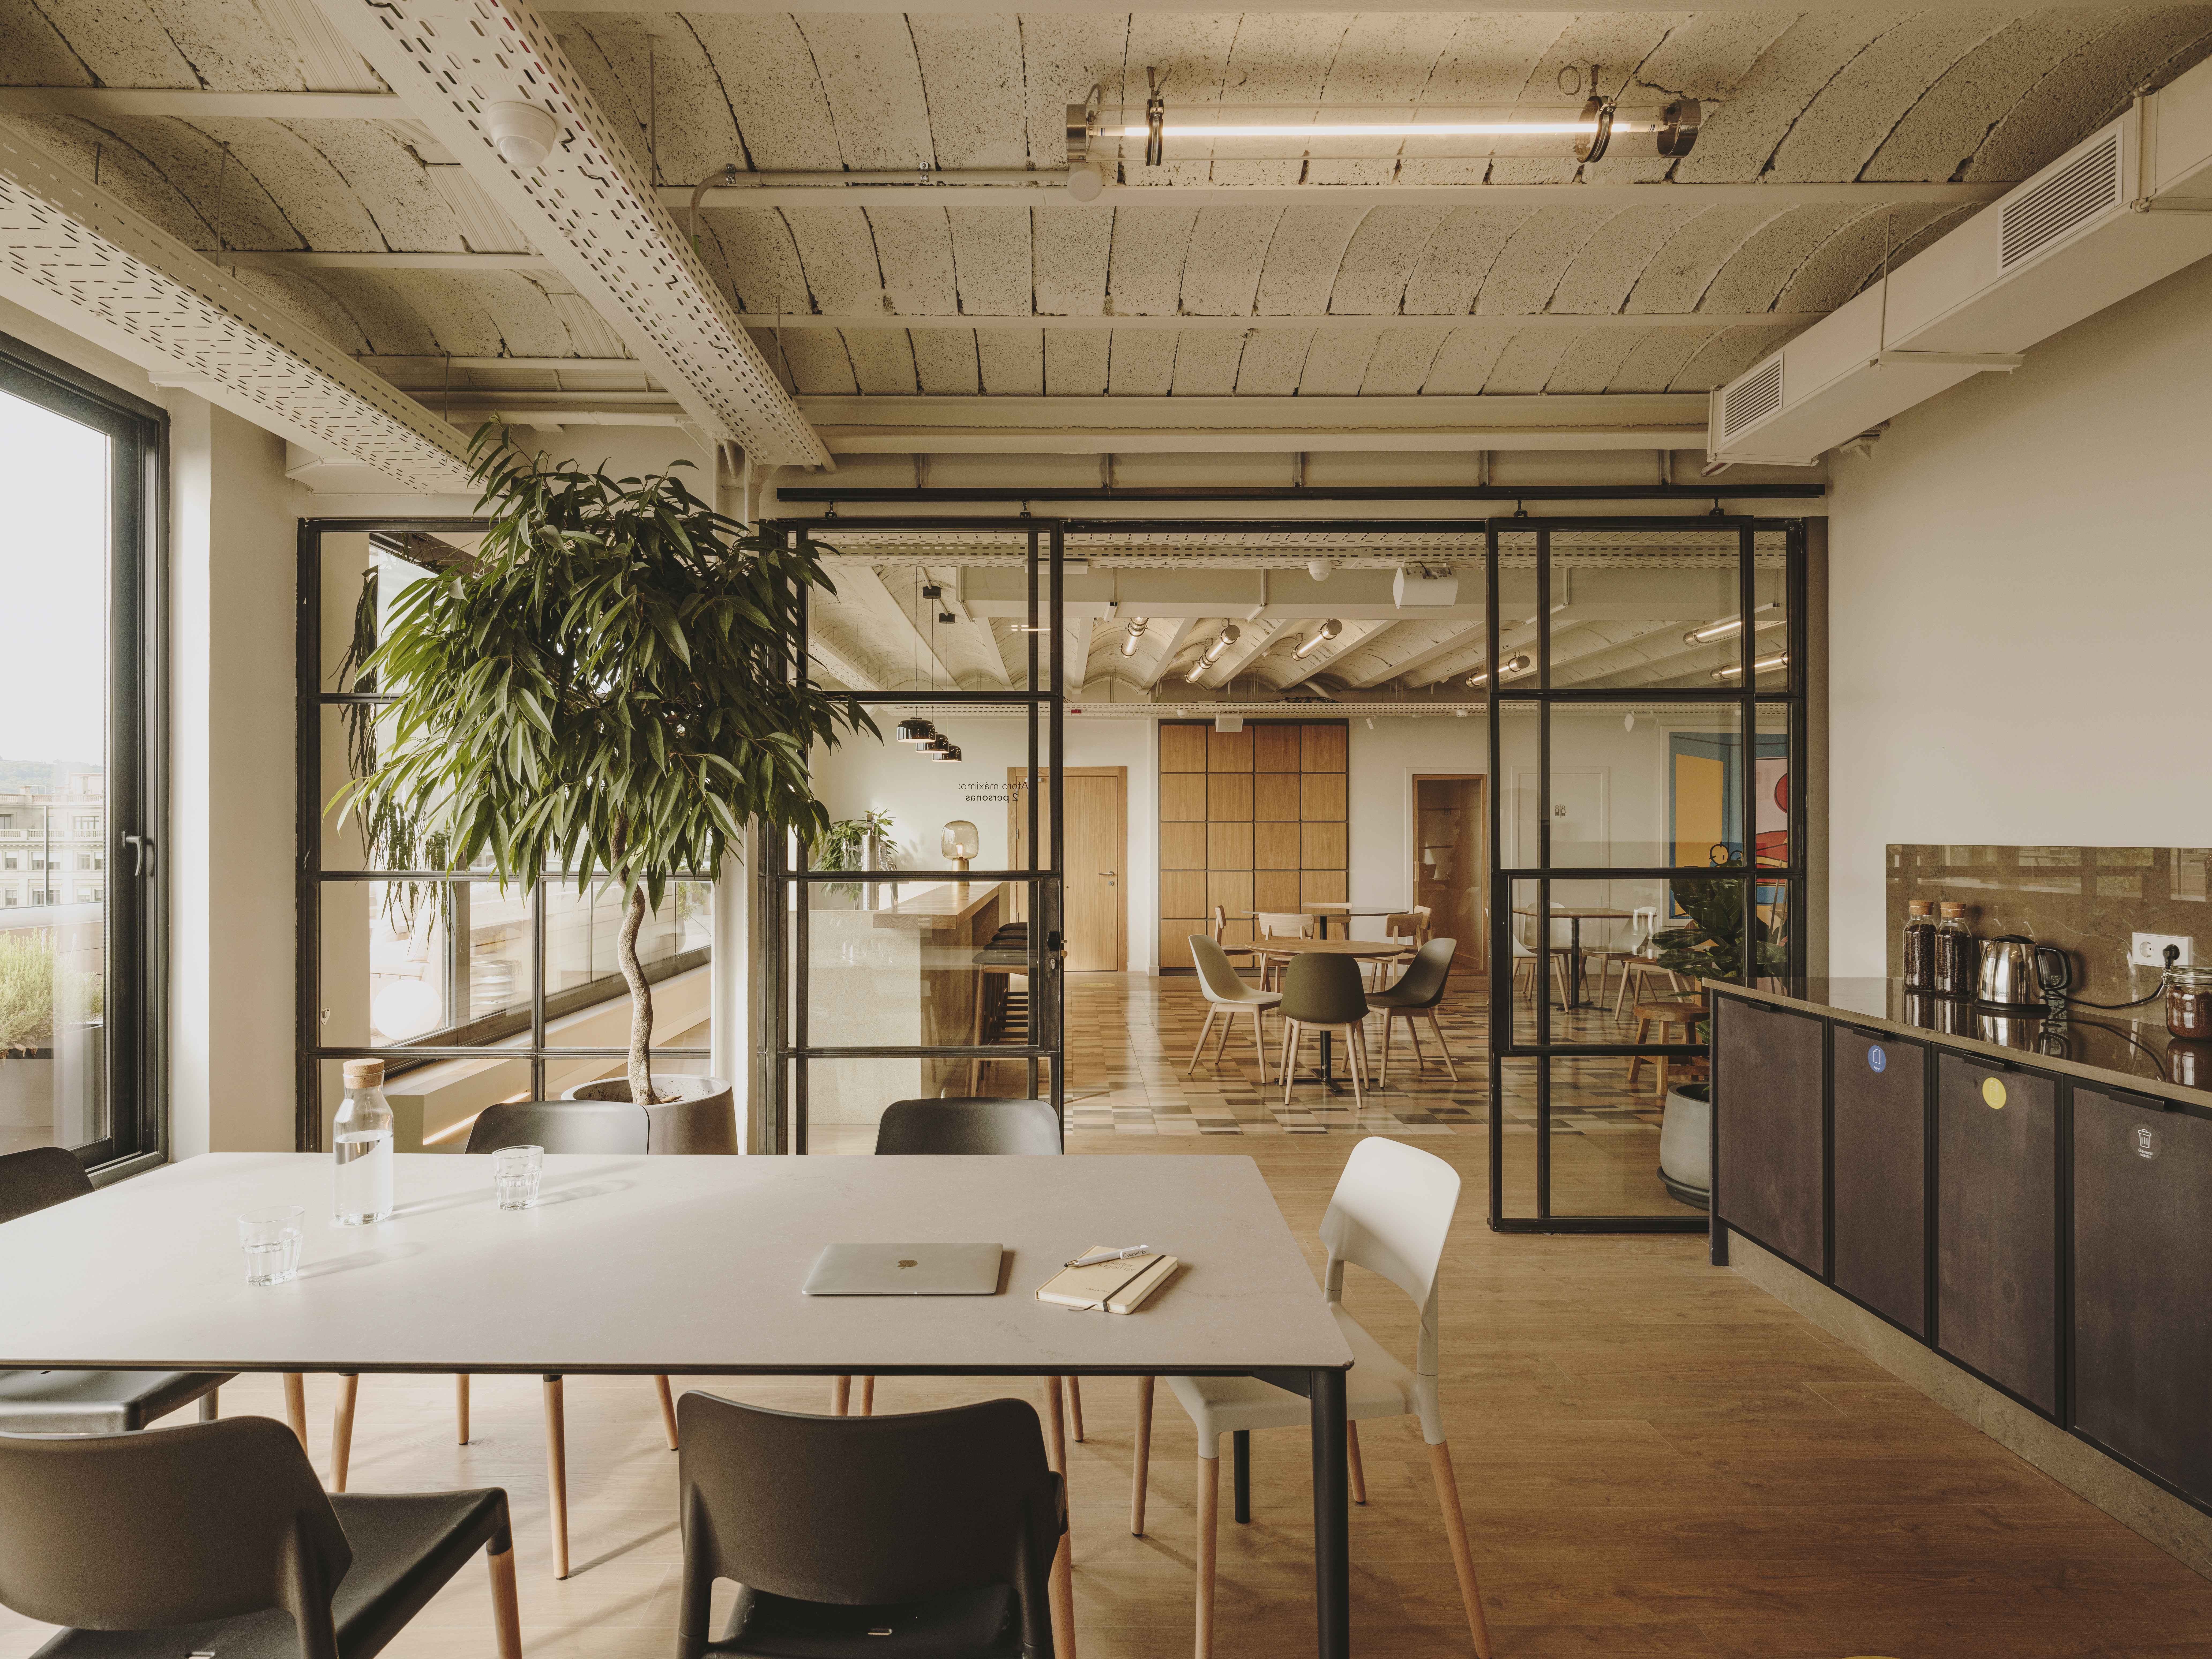 Office design: How to adapt it to a flexible future